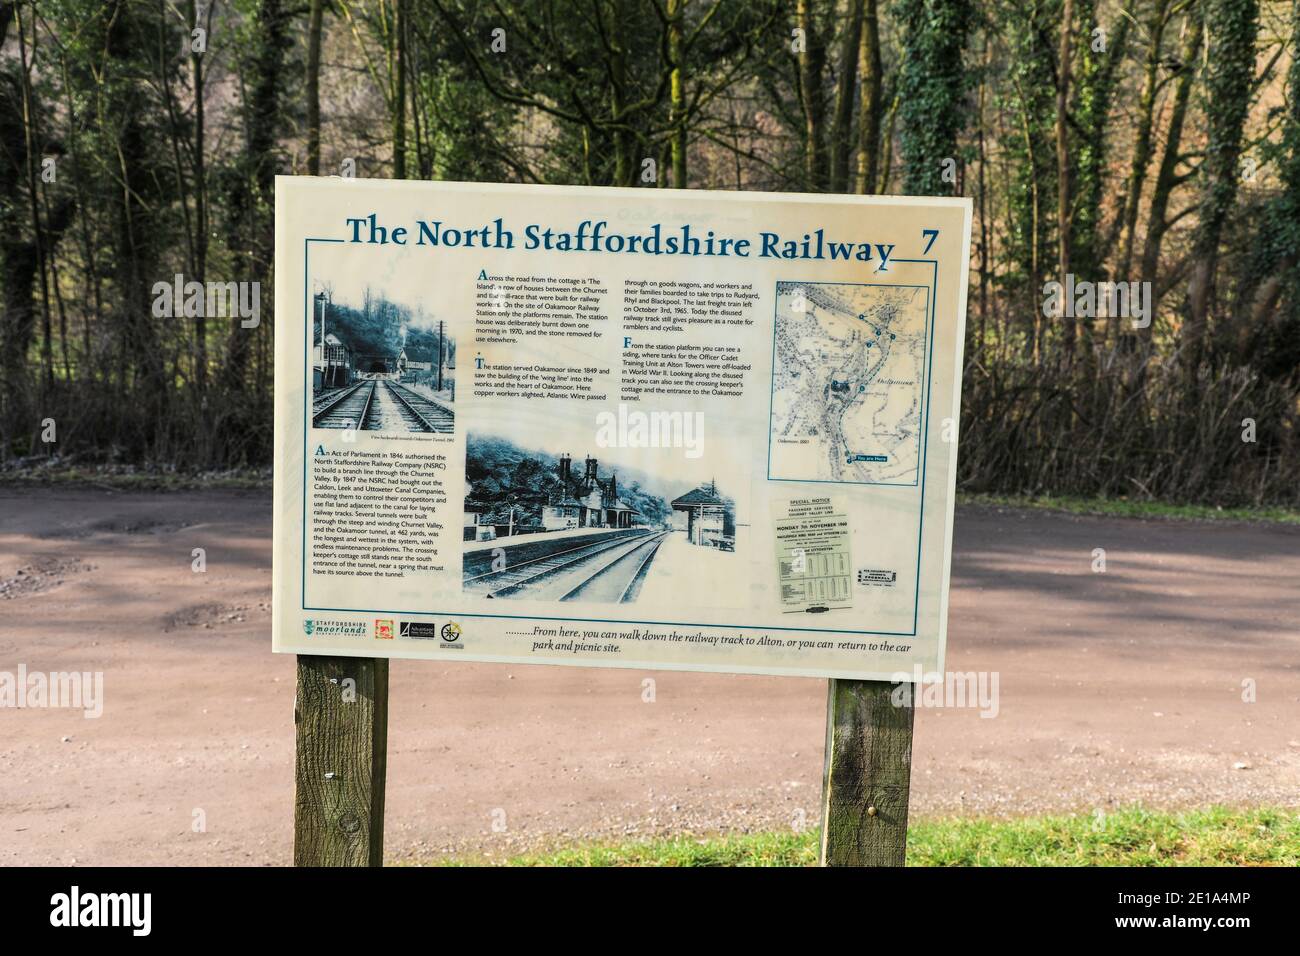 A sign or information board about the North Staffordshire Railway on the old Churnet railway line at Oakamoor, Staffordshire, England, UK Stock Photo